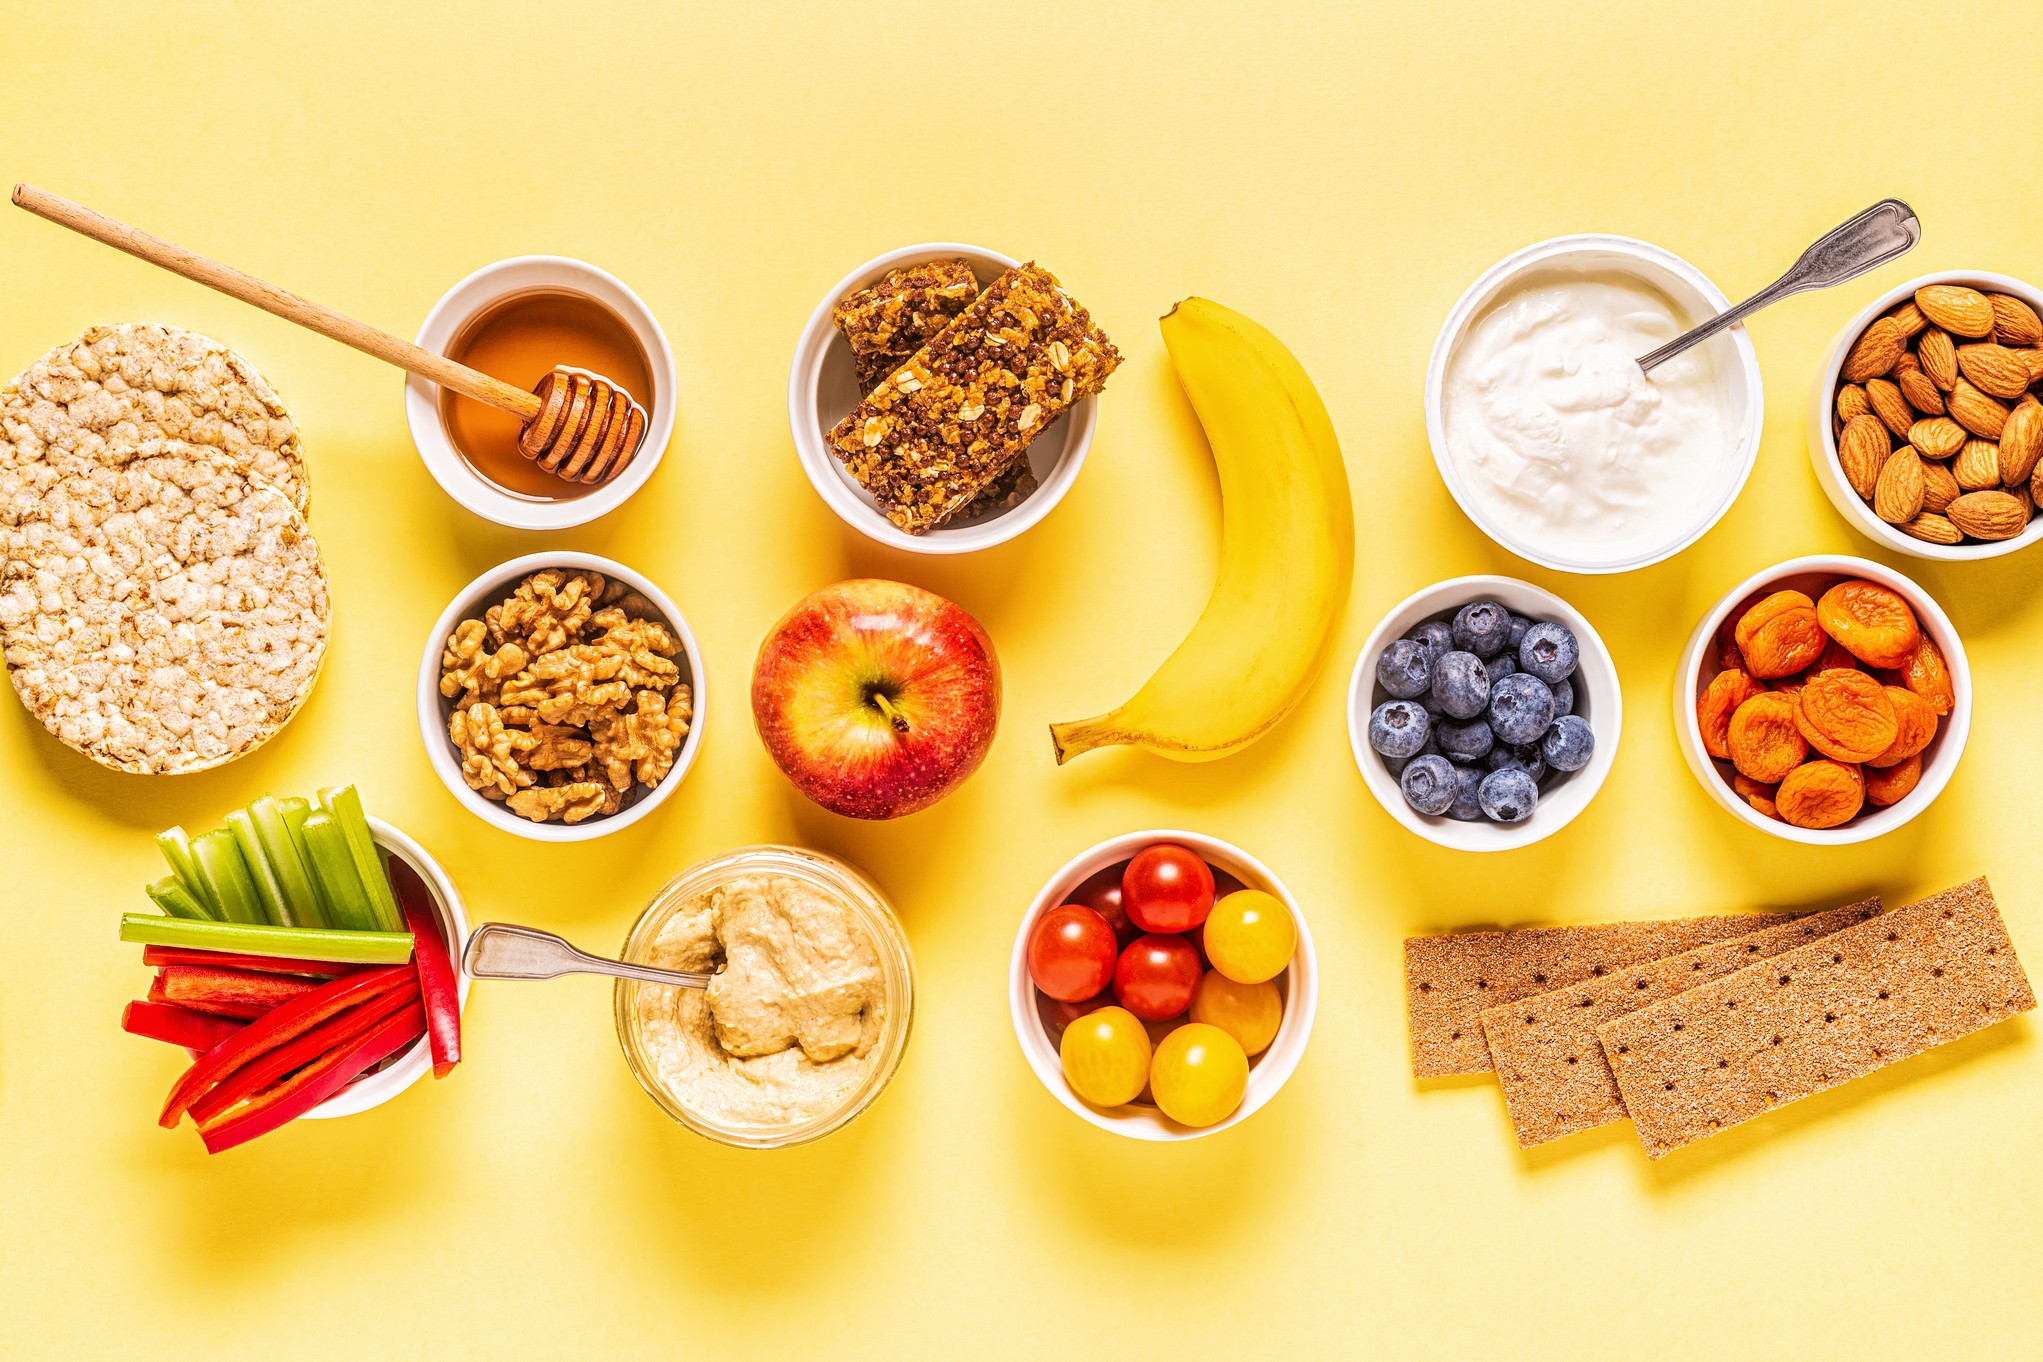 New York City Alternative Snack Choices | Better-for-You | Healthy Break Room